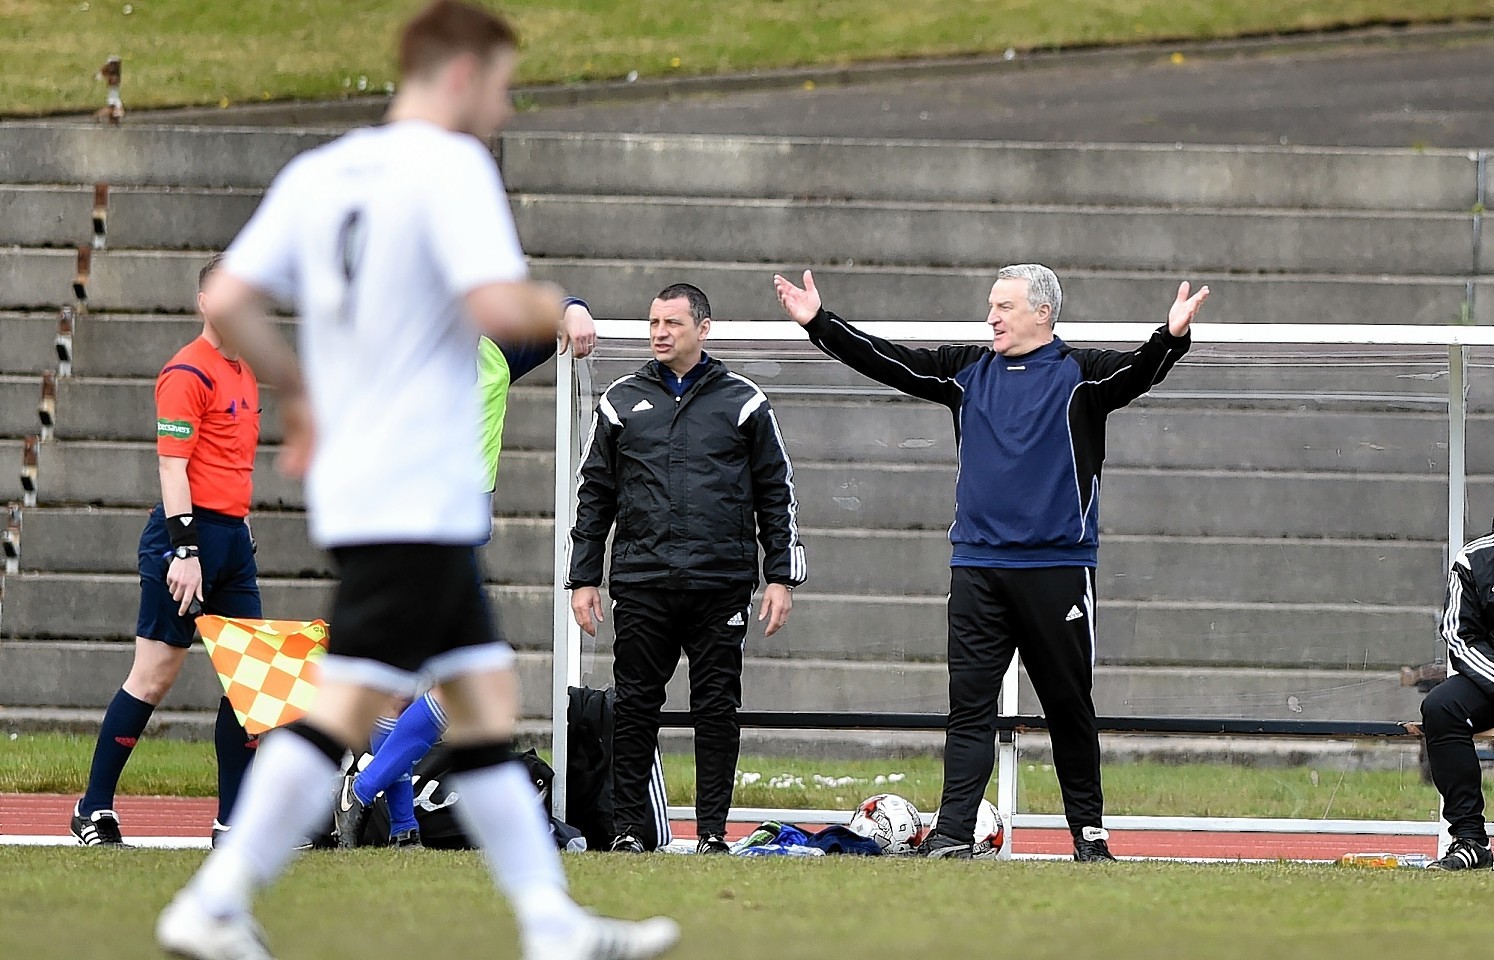 Cove manager John Sheran on the Meadowbank touchline on Saturday. Picture by Colin Rennie